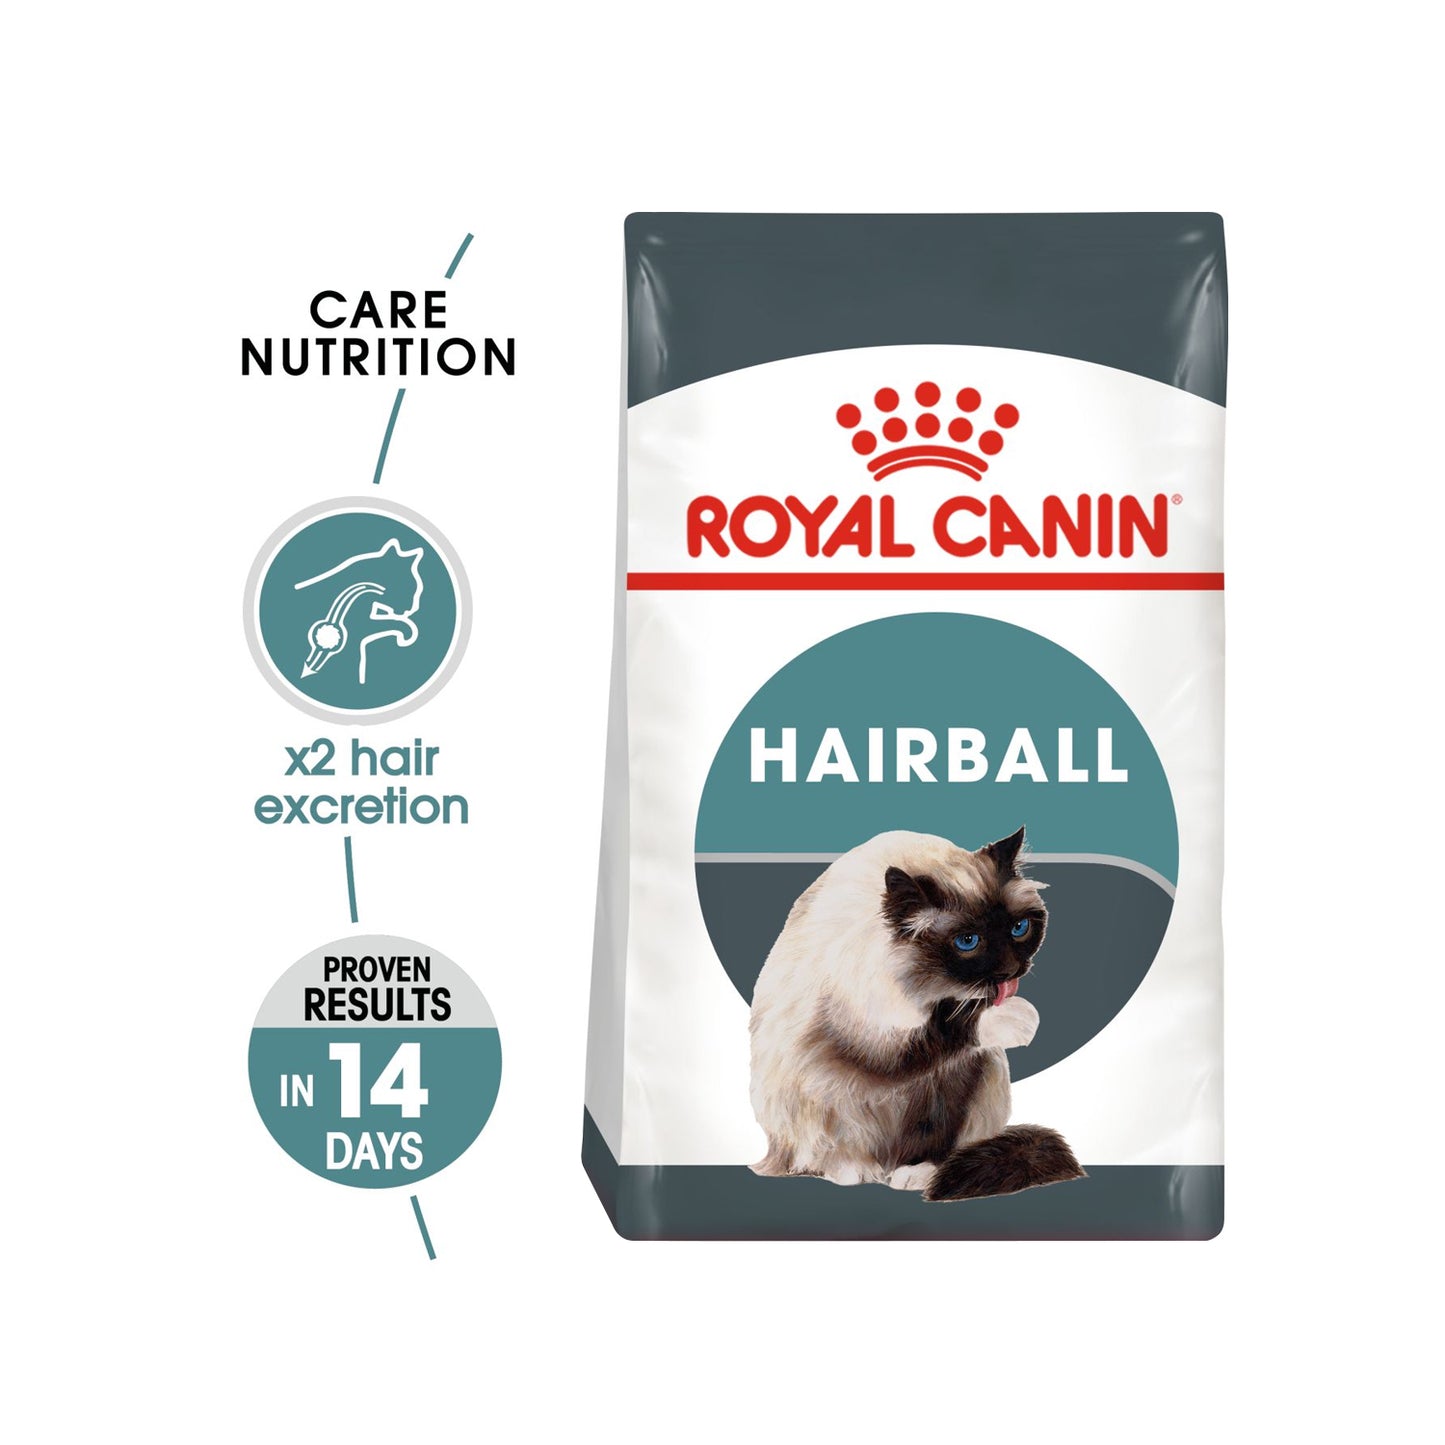 Royal Canin - Hairball Care Dry Cat Food